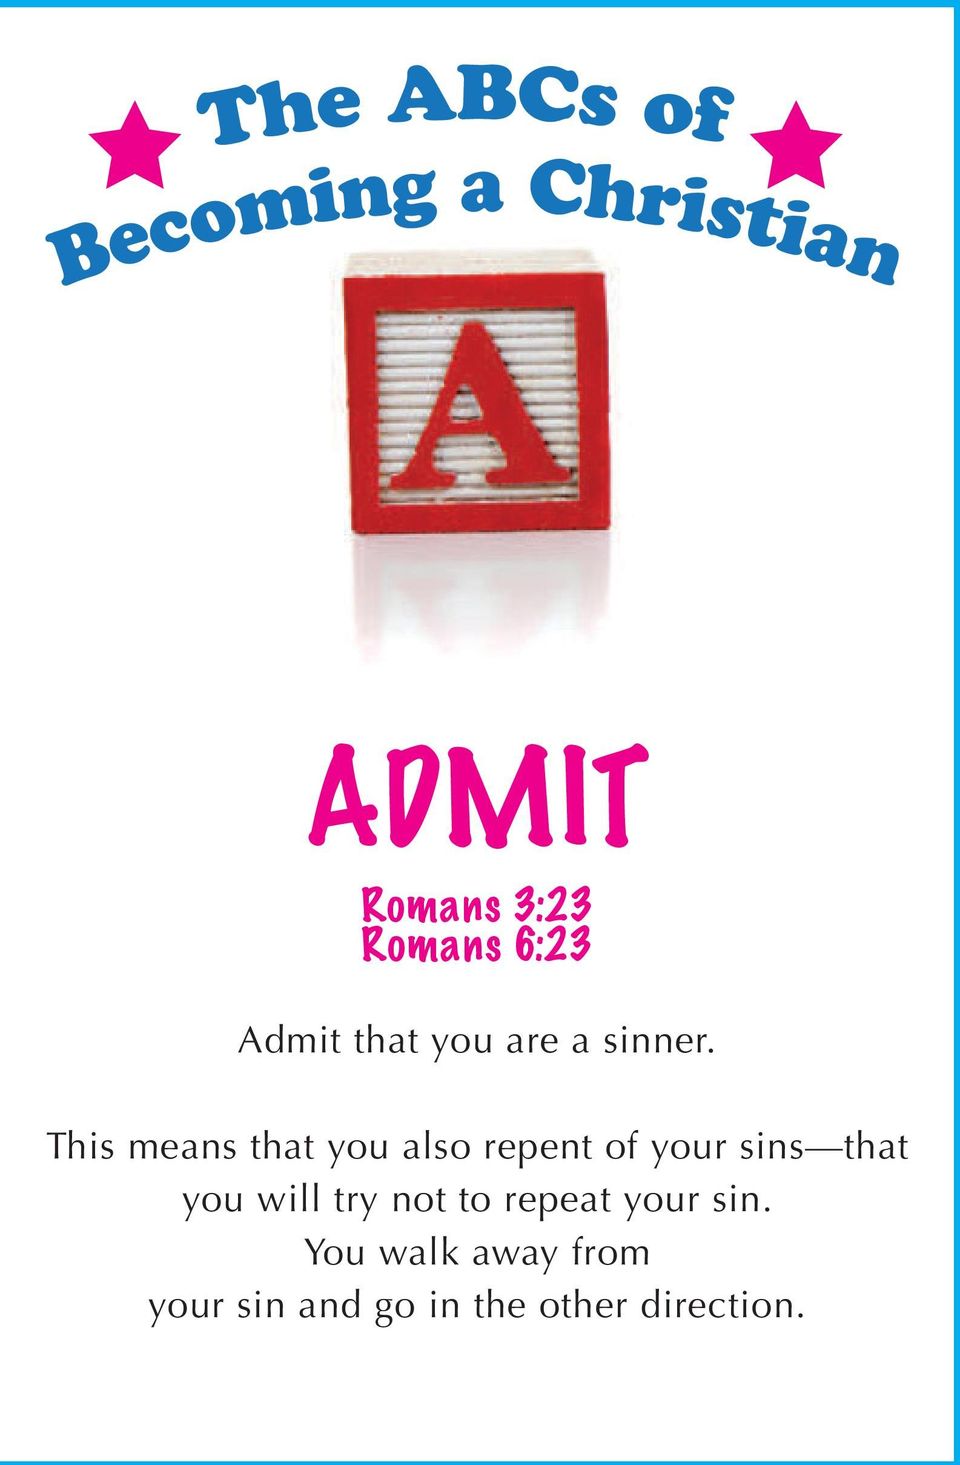 This means that you also repent of your sins that